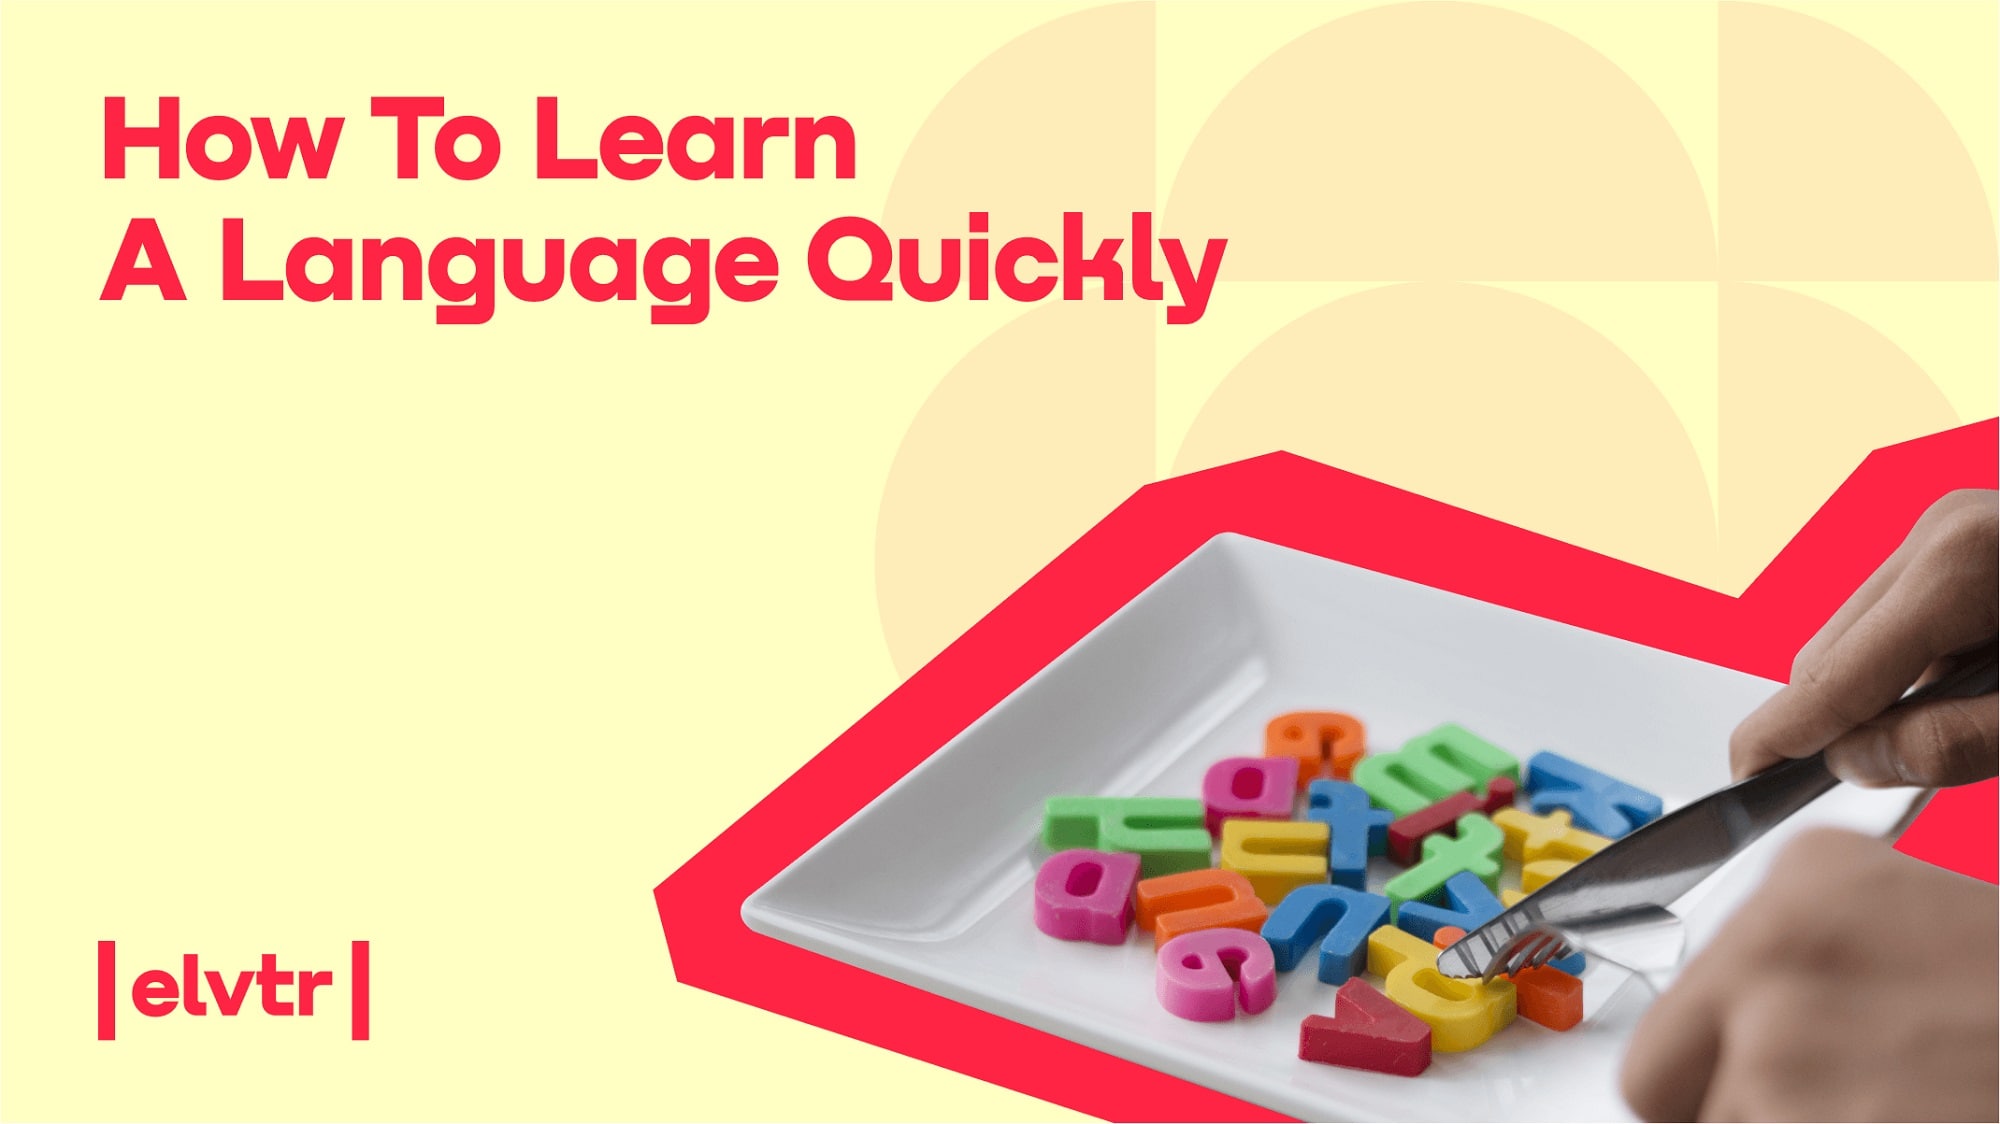 How To Learn A Language Quickly image